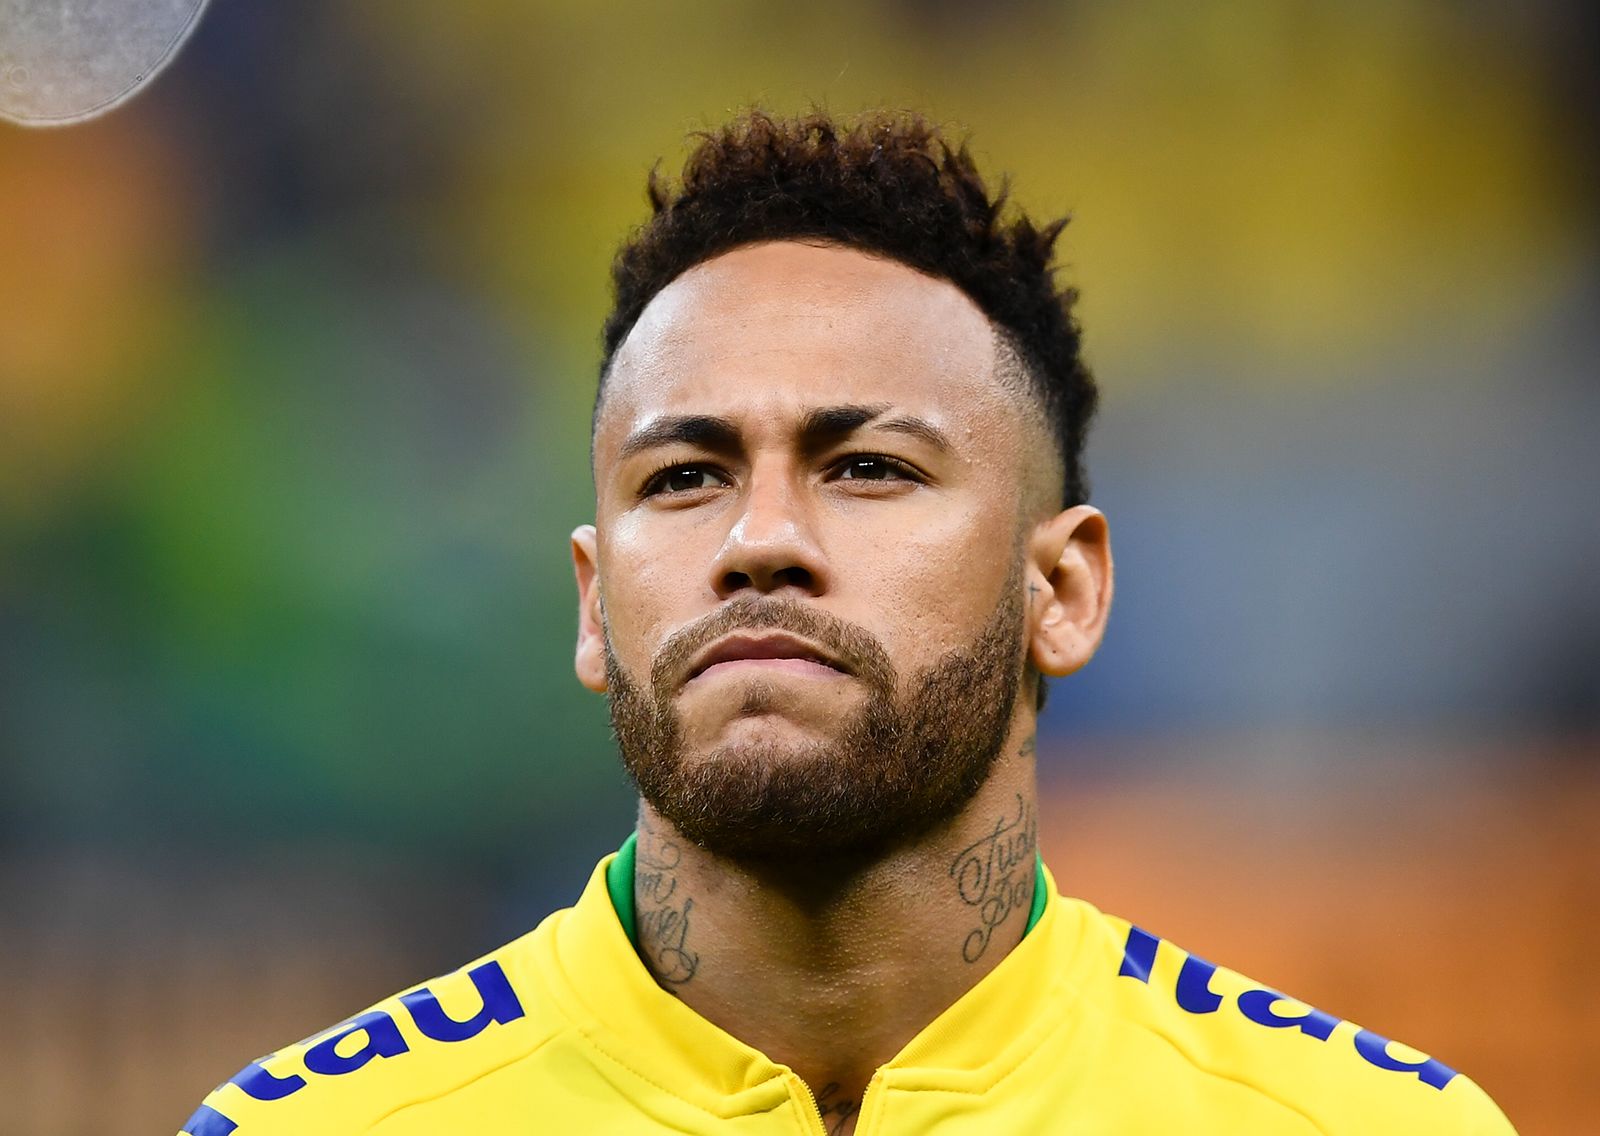 Nike ties Neymar over his refusal to cooperate in sexual assault investigation CNN Business